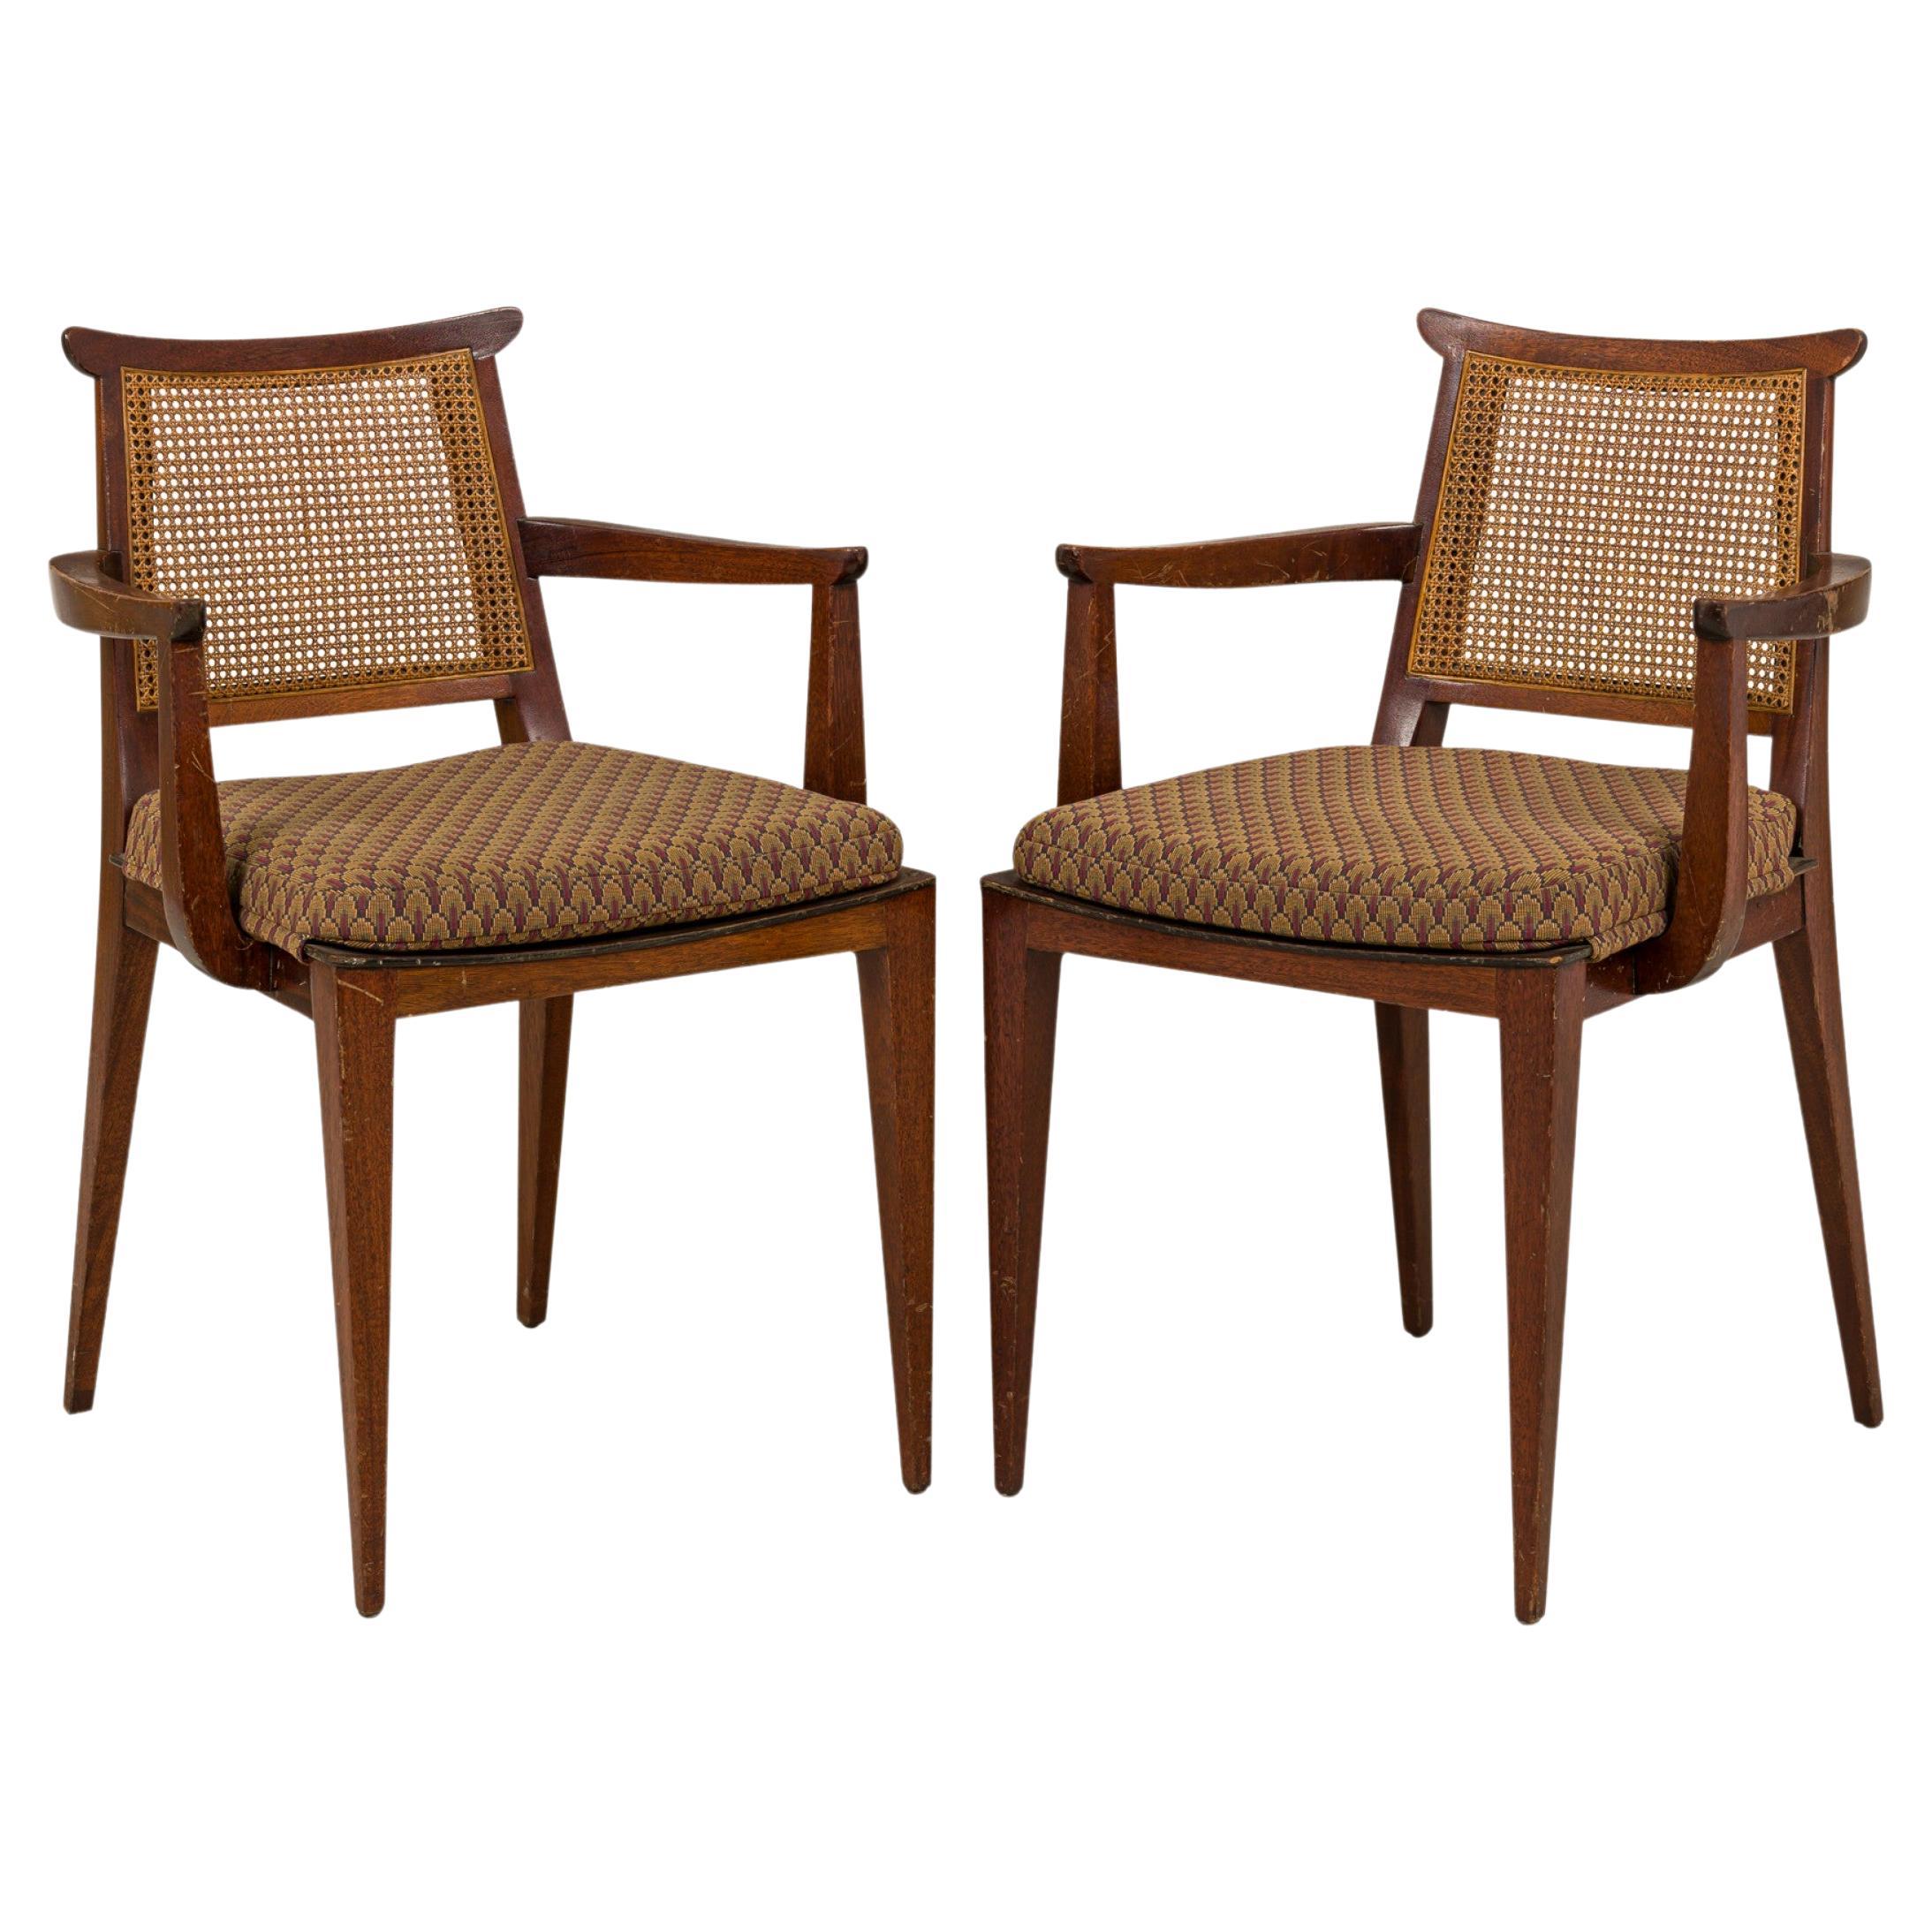 Pair of Edward Wormley for Dunbar Pulled Feather Patterned Upholstery Wooden  For Sale